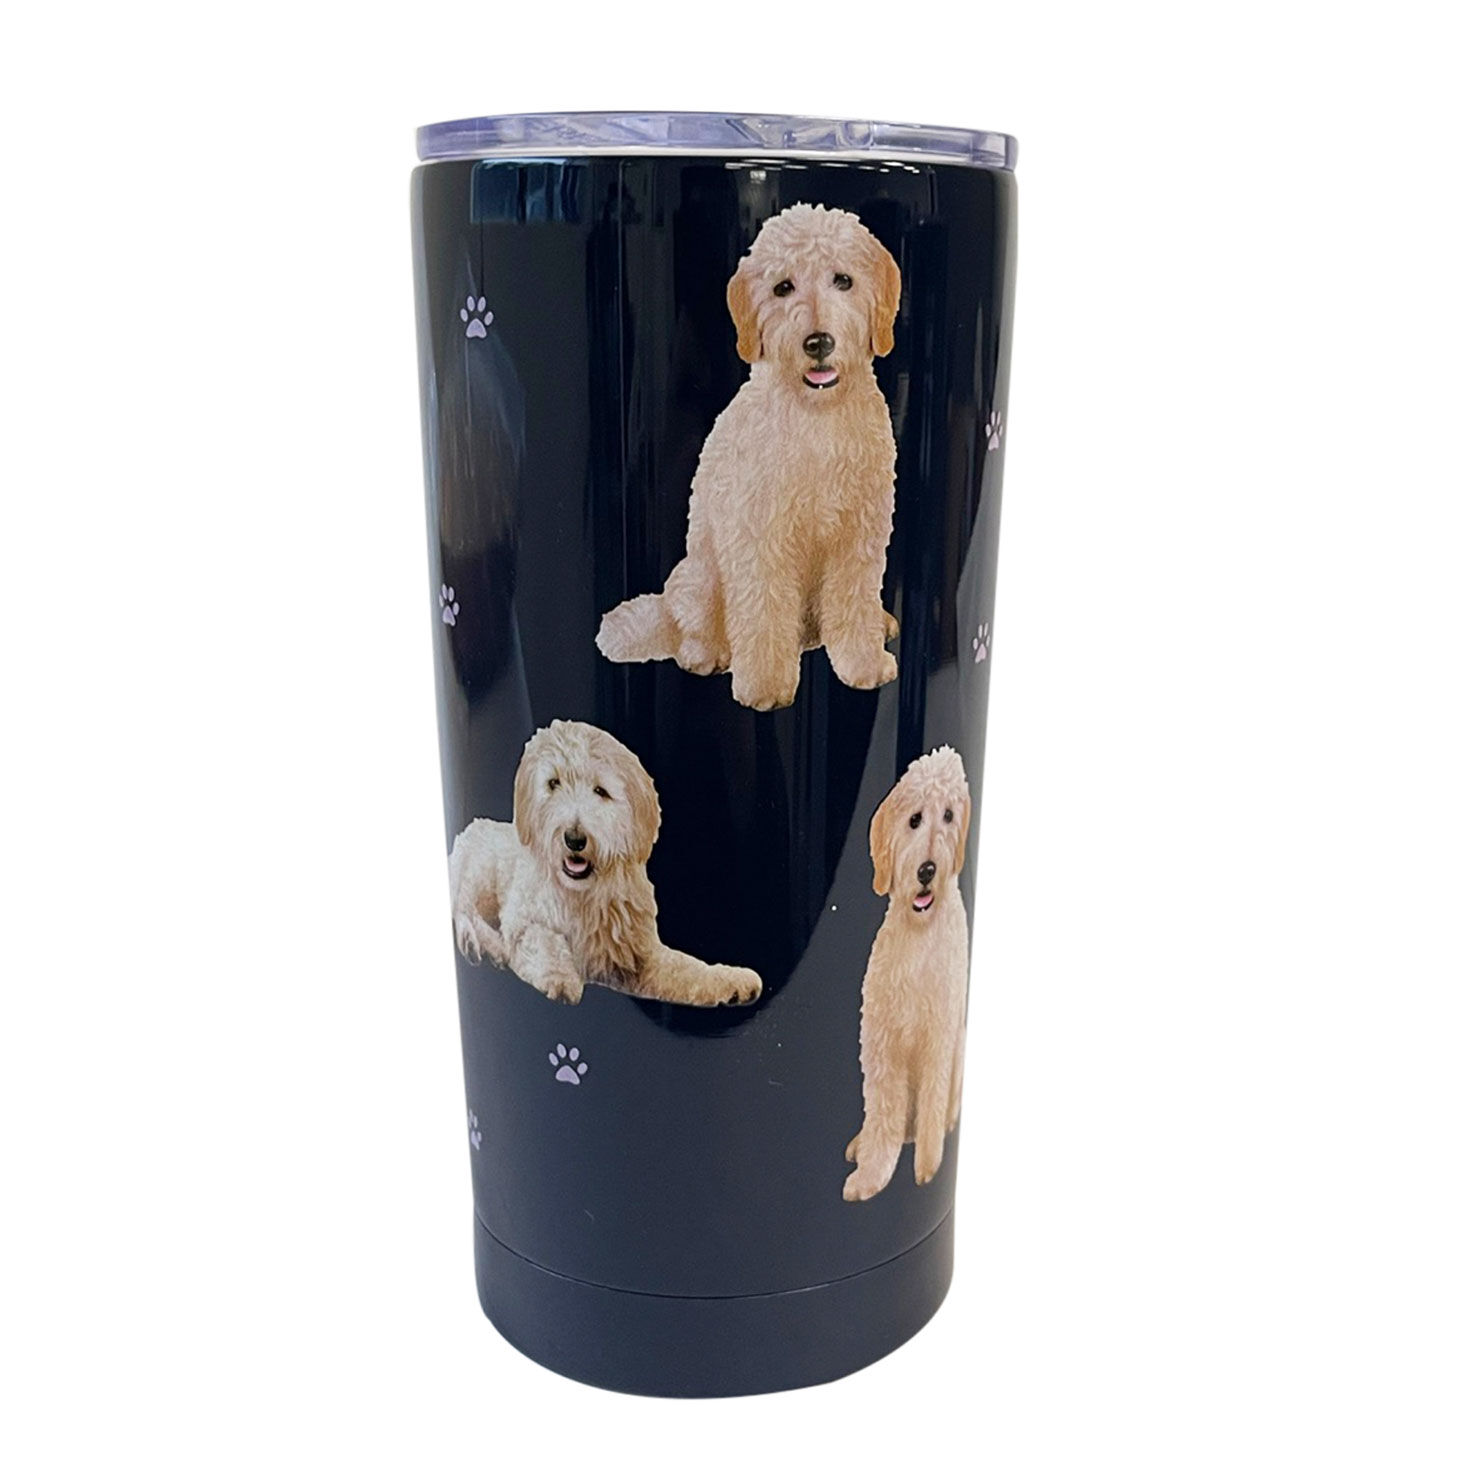 GOLDENDOODLE Dog Stainless Steel 24 Oz. Water Bottle SERENGETI Brand By E&S  Pets